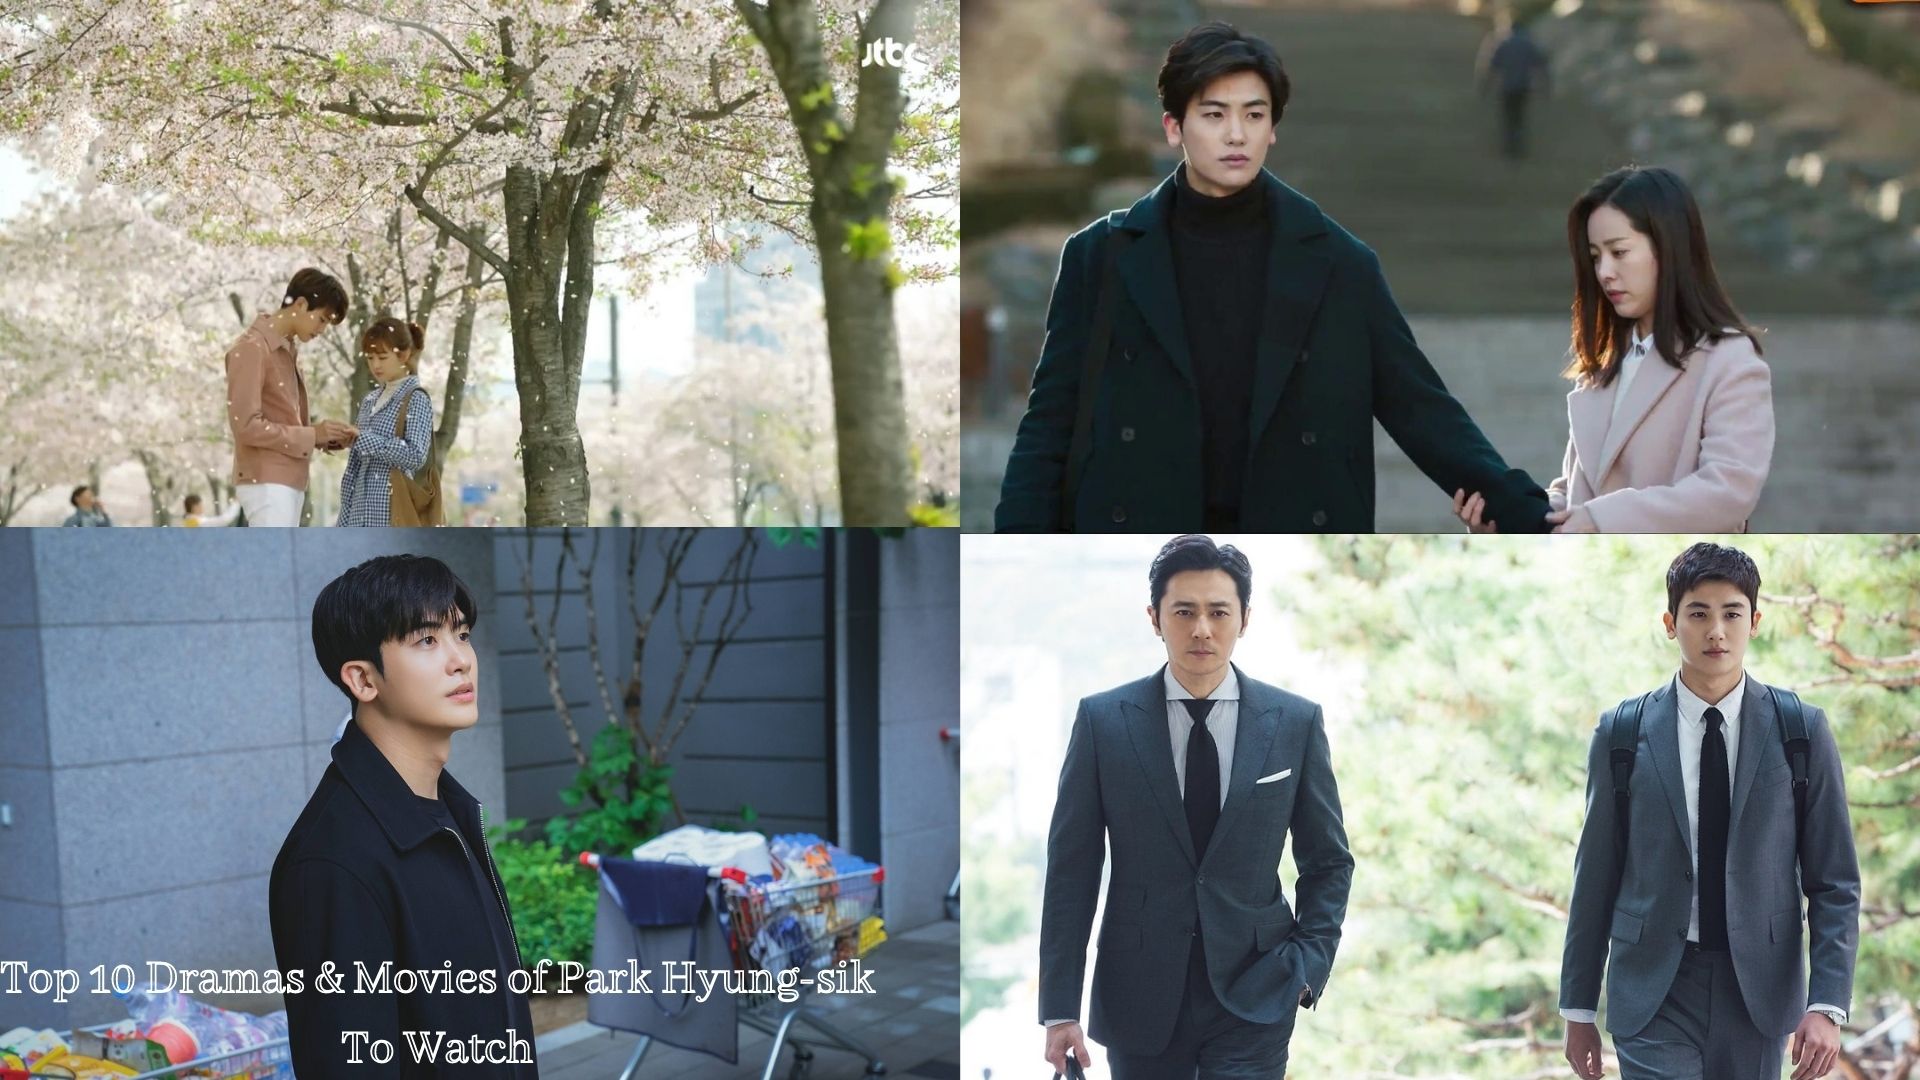 Top 10 Dramas and Movies of Park Hyung-sik To Watch